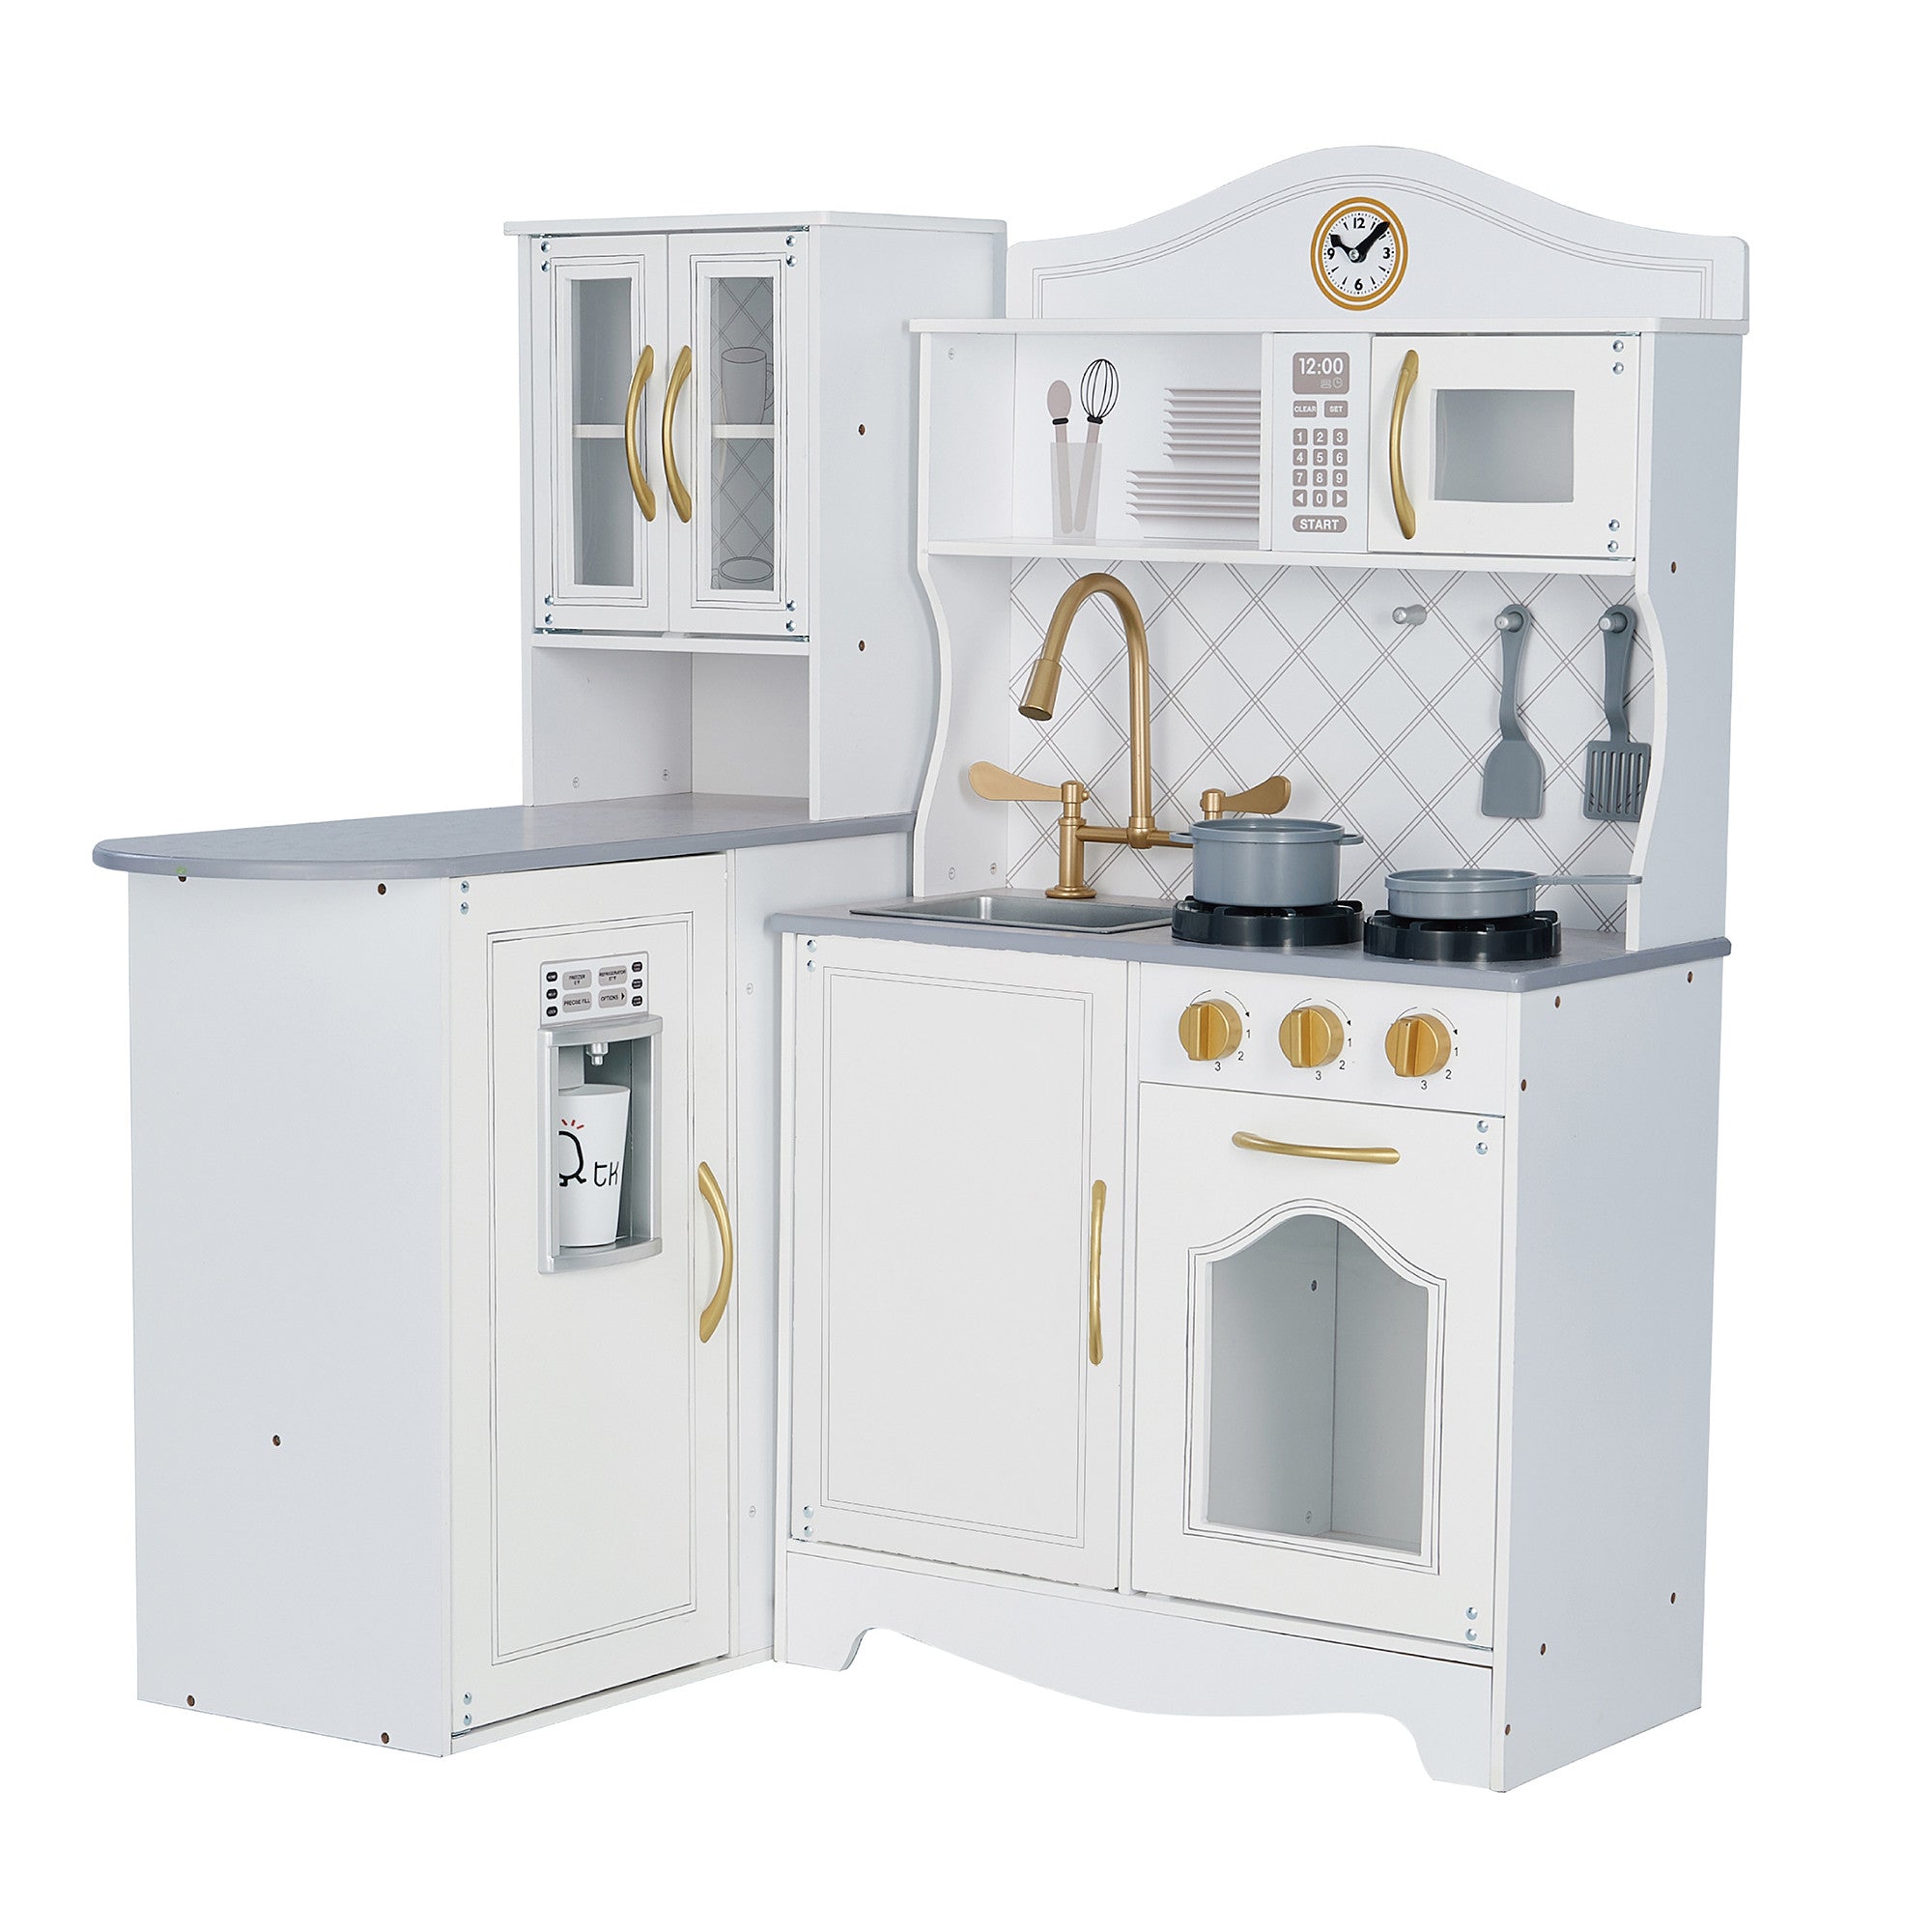 Large corner play kitchen for kids. White with grey countertops. L shape design with cabinets, microwave, sink, ice maker, oven and stovetop. 